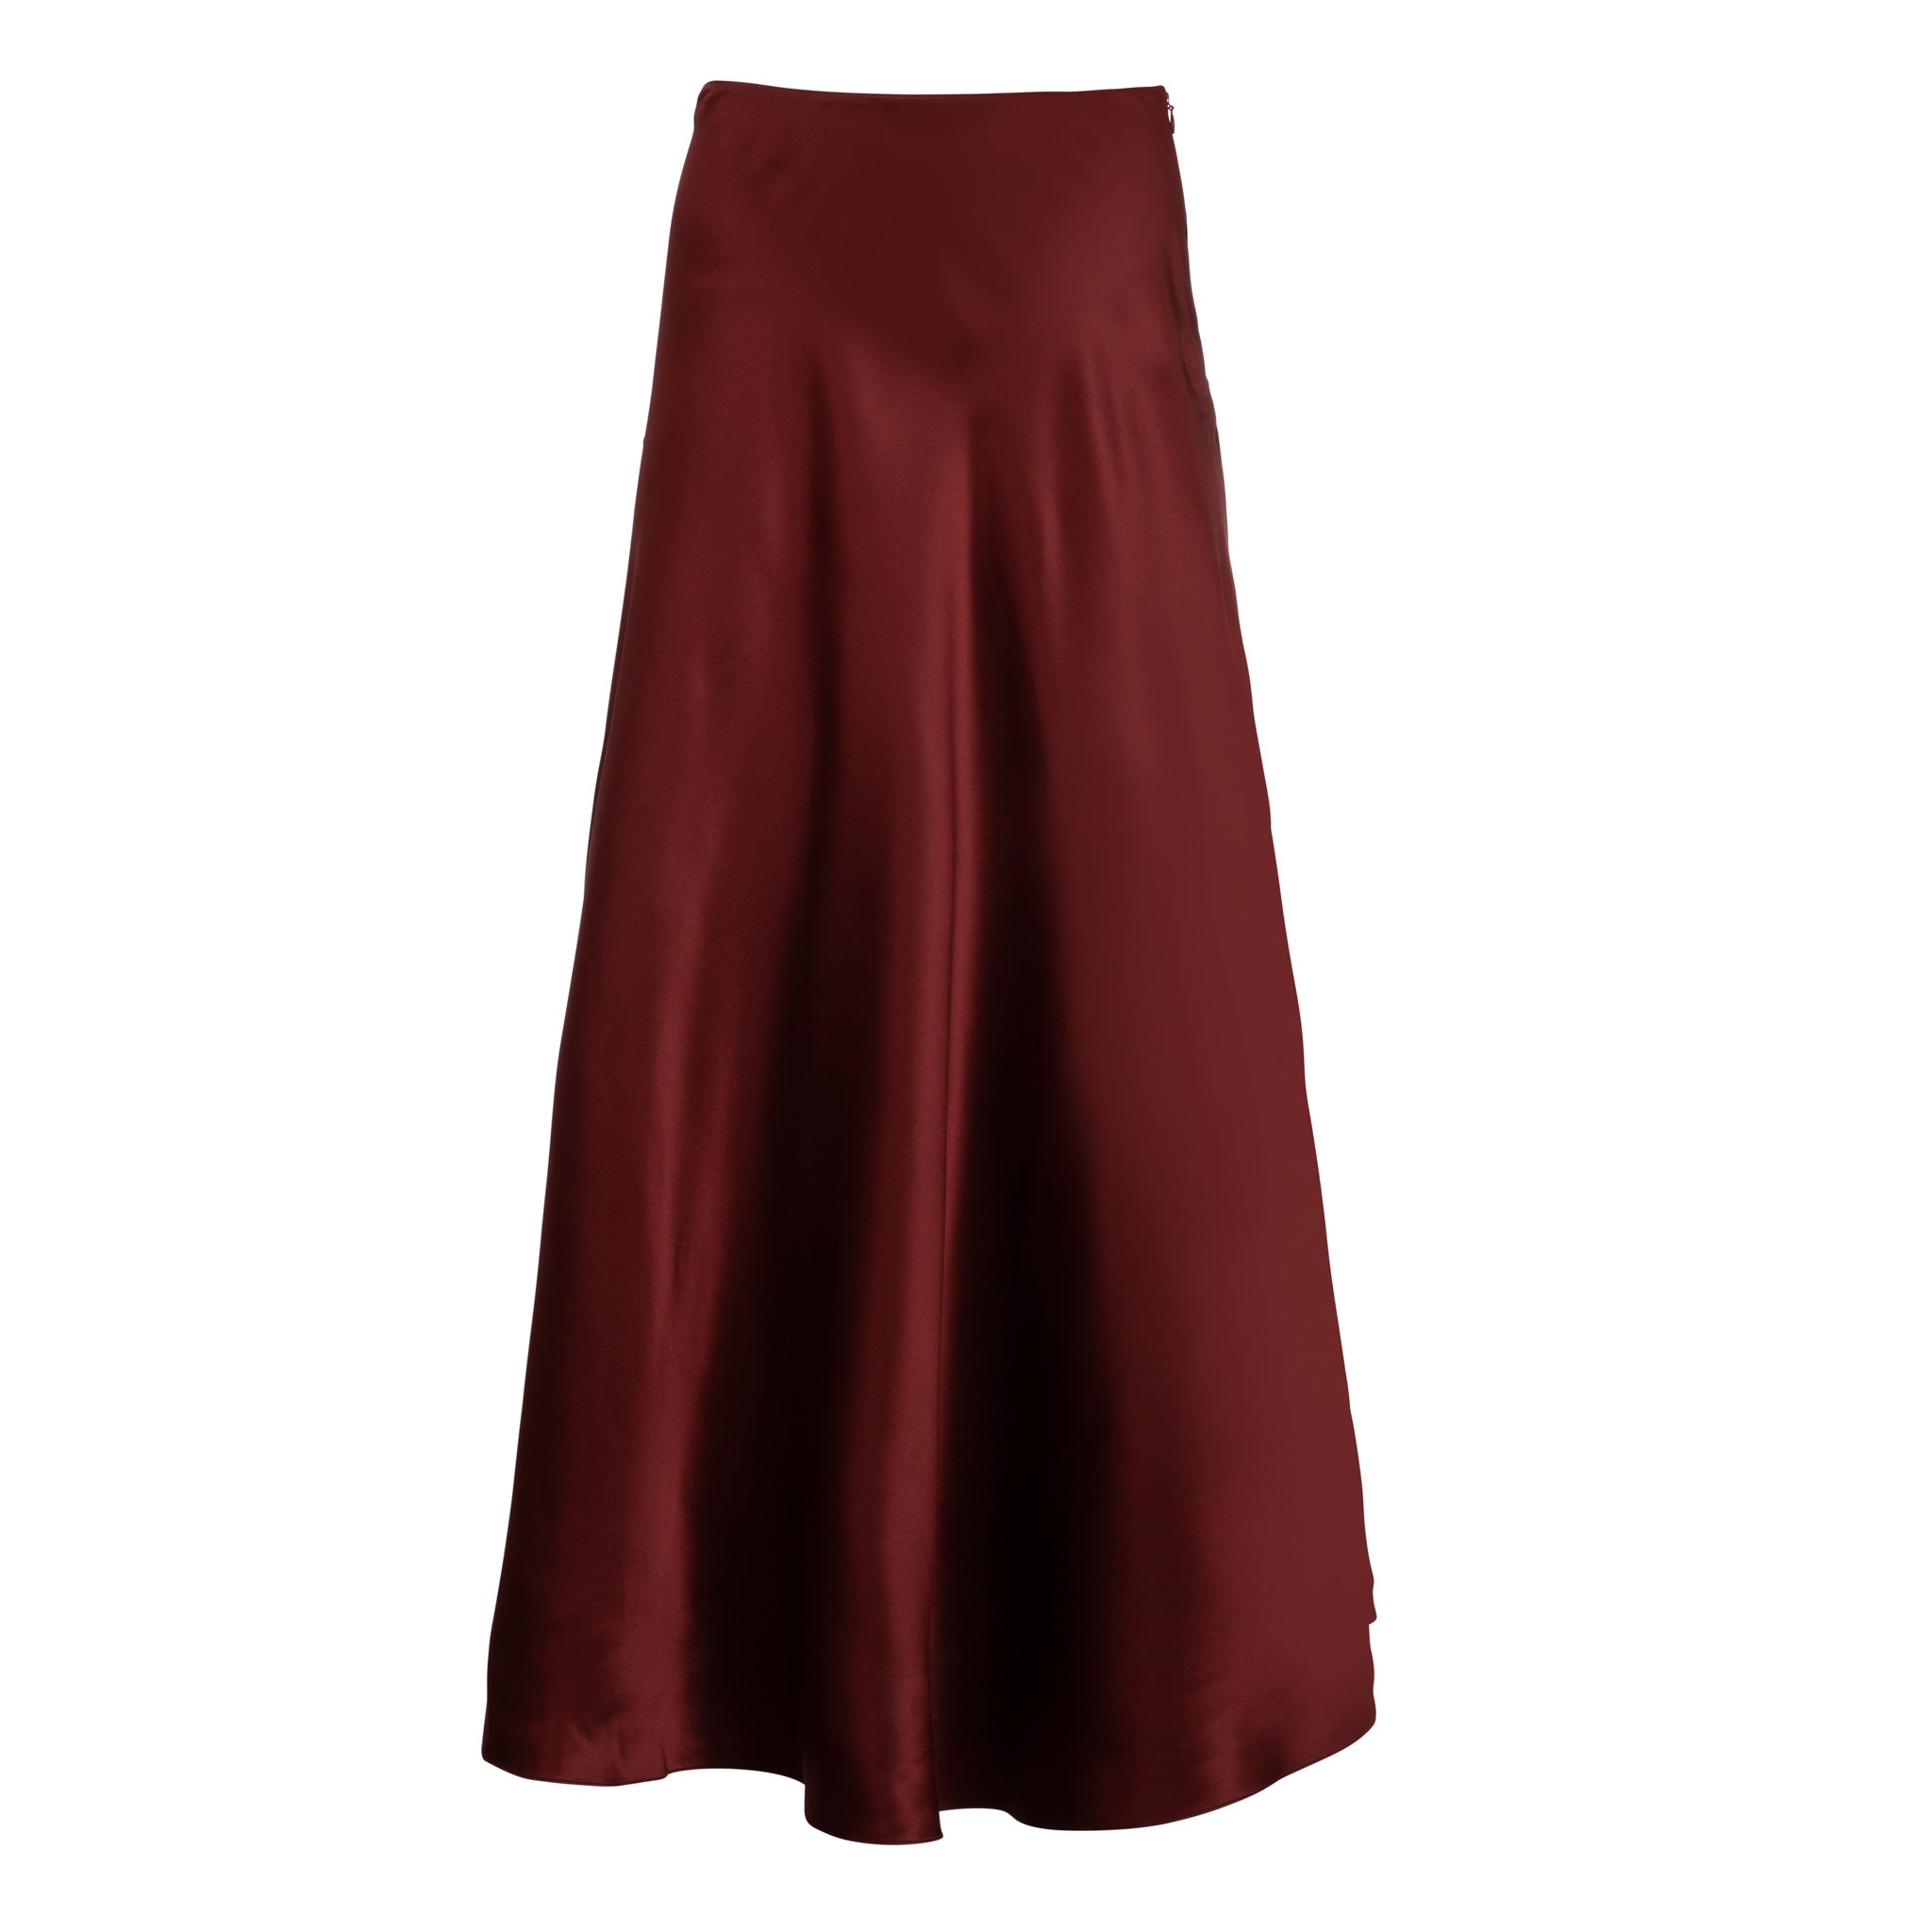 Update more than 51 myntra wrap around skirts super hot